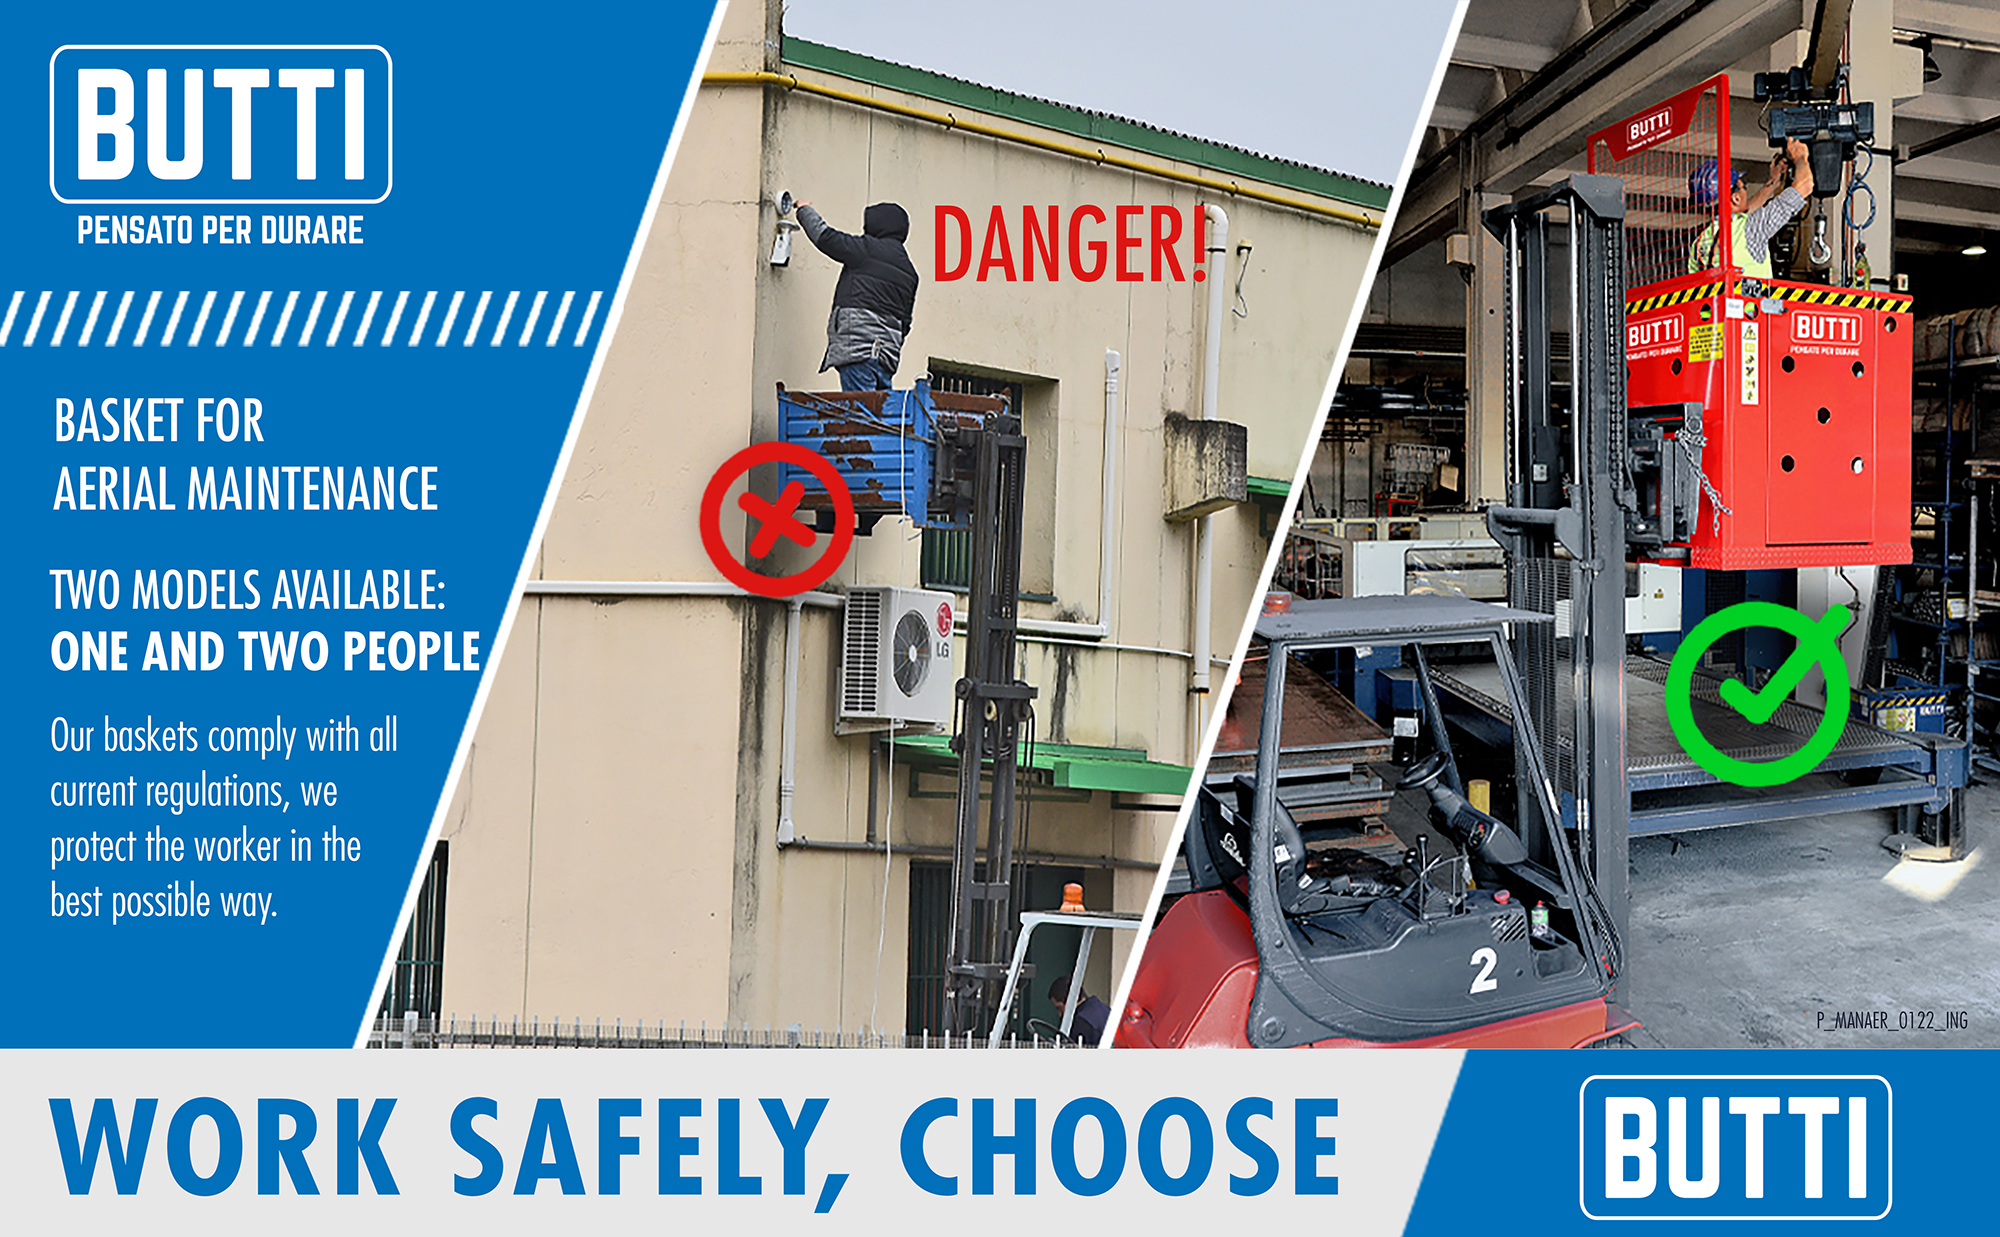 Work safely, choose Butti